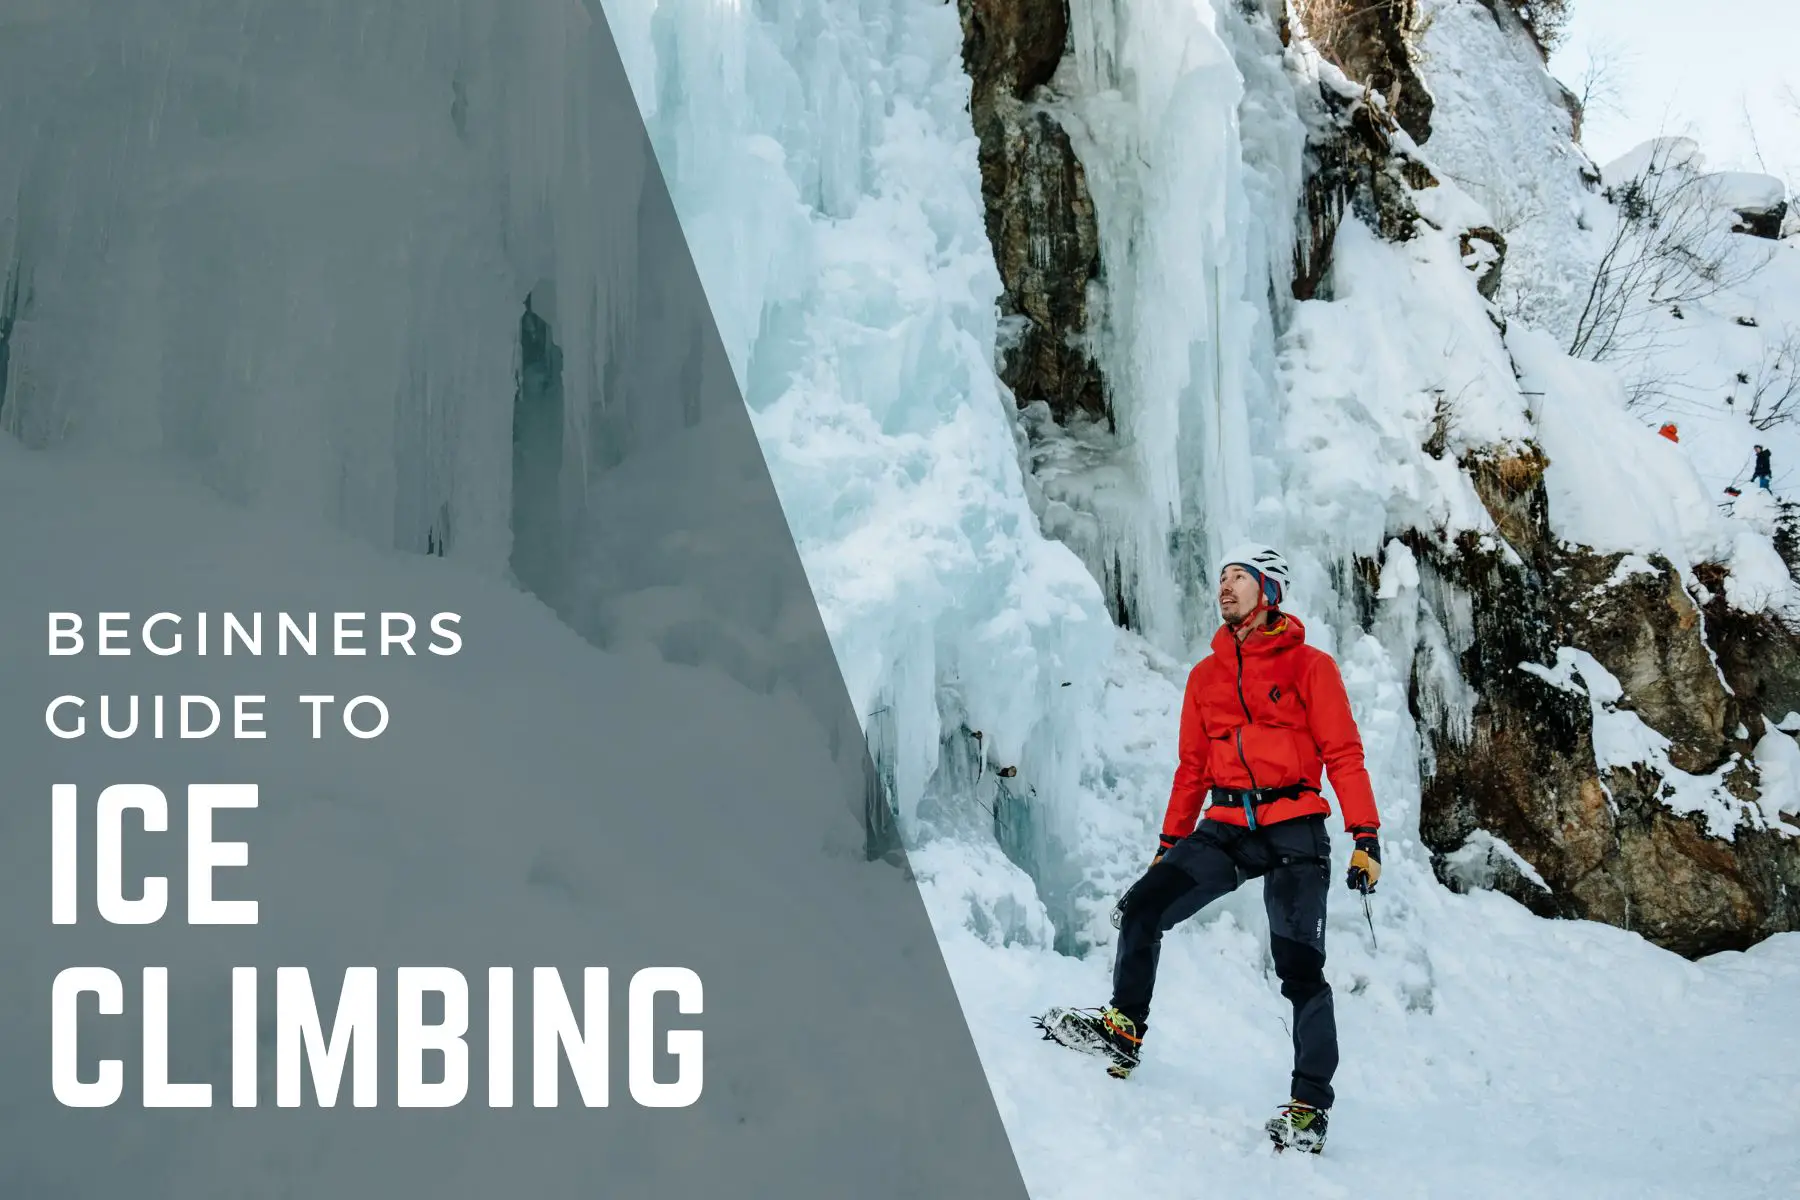 Male ice climber stands at the bottom of frozen waterfall